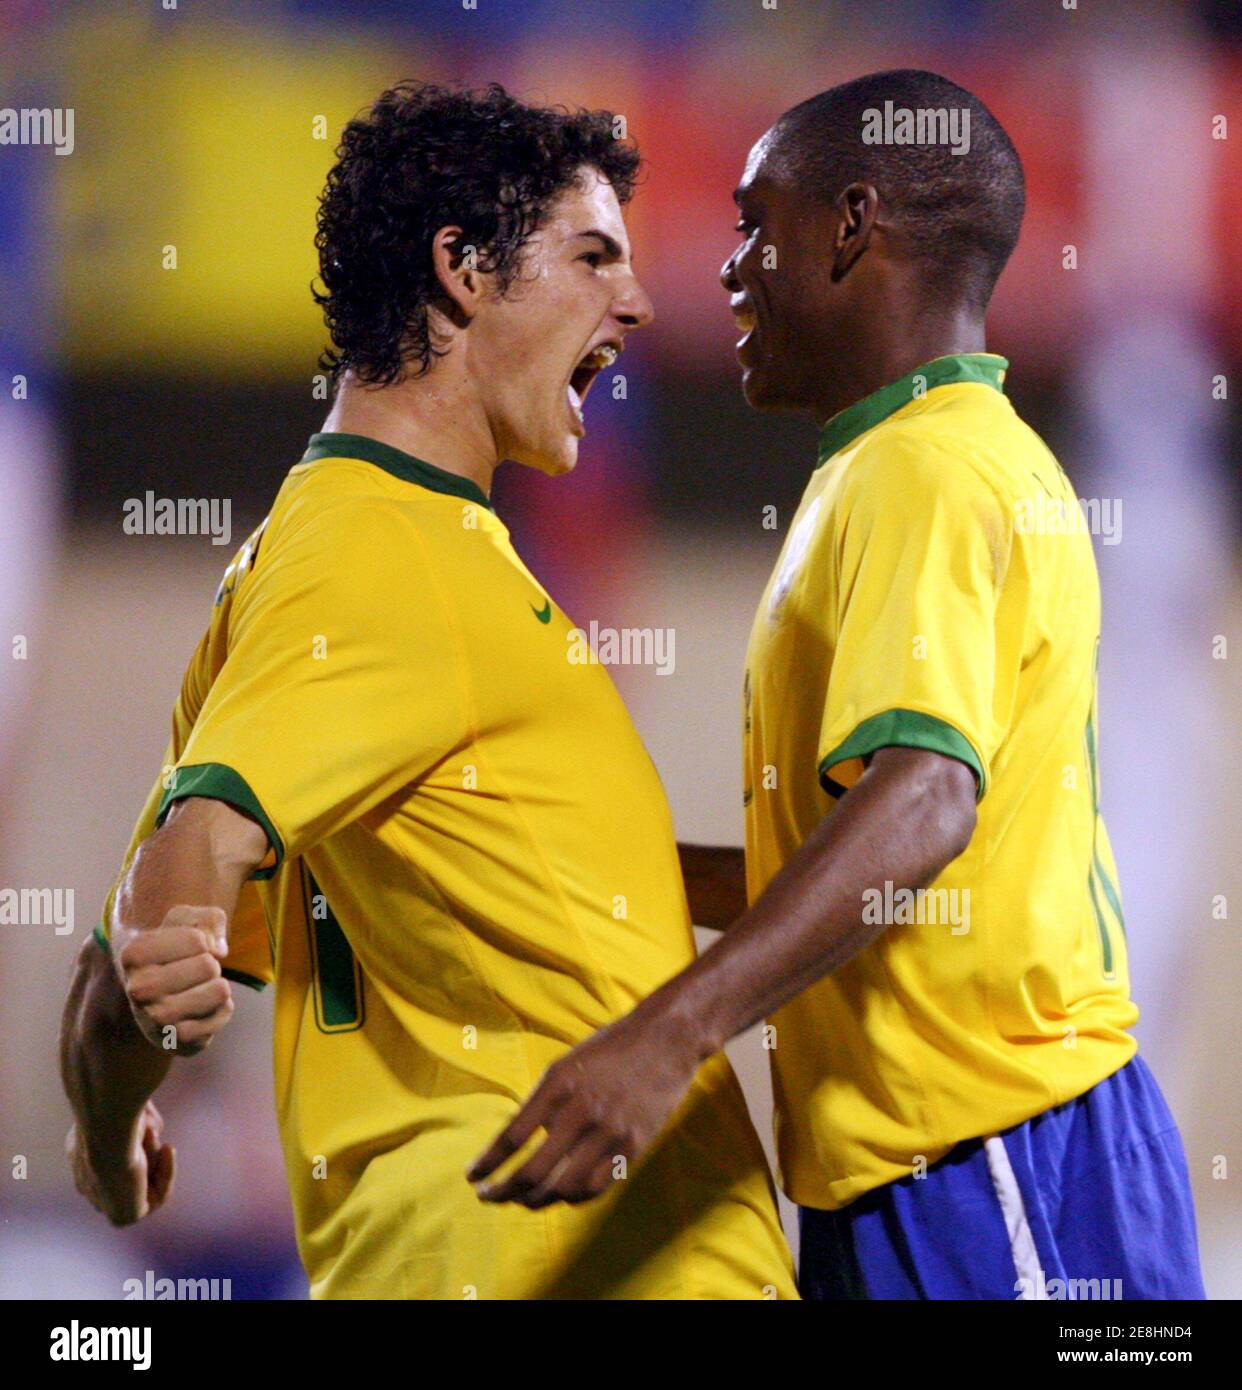 Brazil S Alexandre Pato Rodrigues L Celebrates With Team Mate Luiz Adriano Souza Da Silva After He Scored Against Chile During Their Second Round Soccer Match In The South American Under 20 Championship In